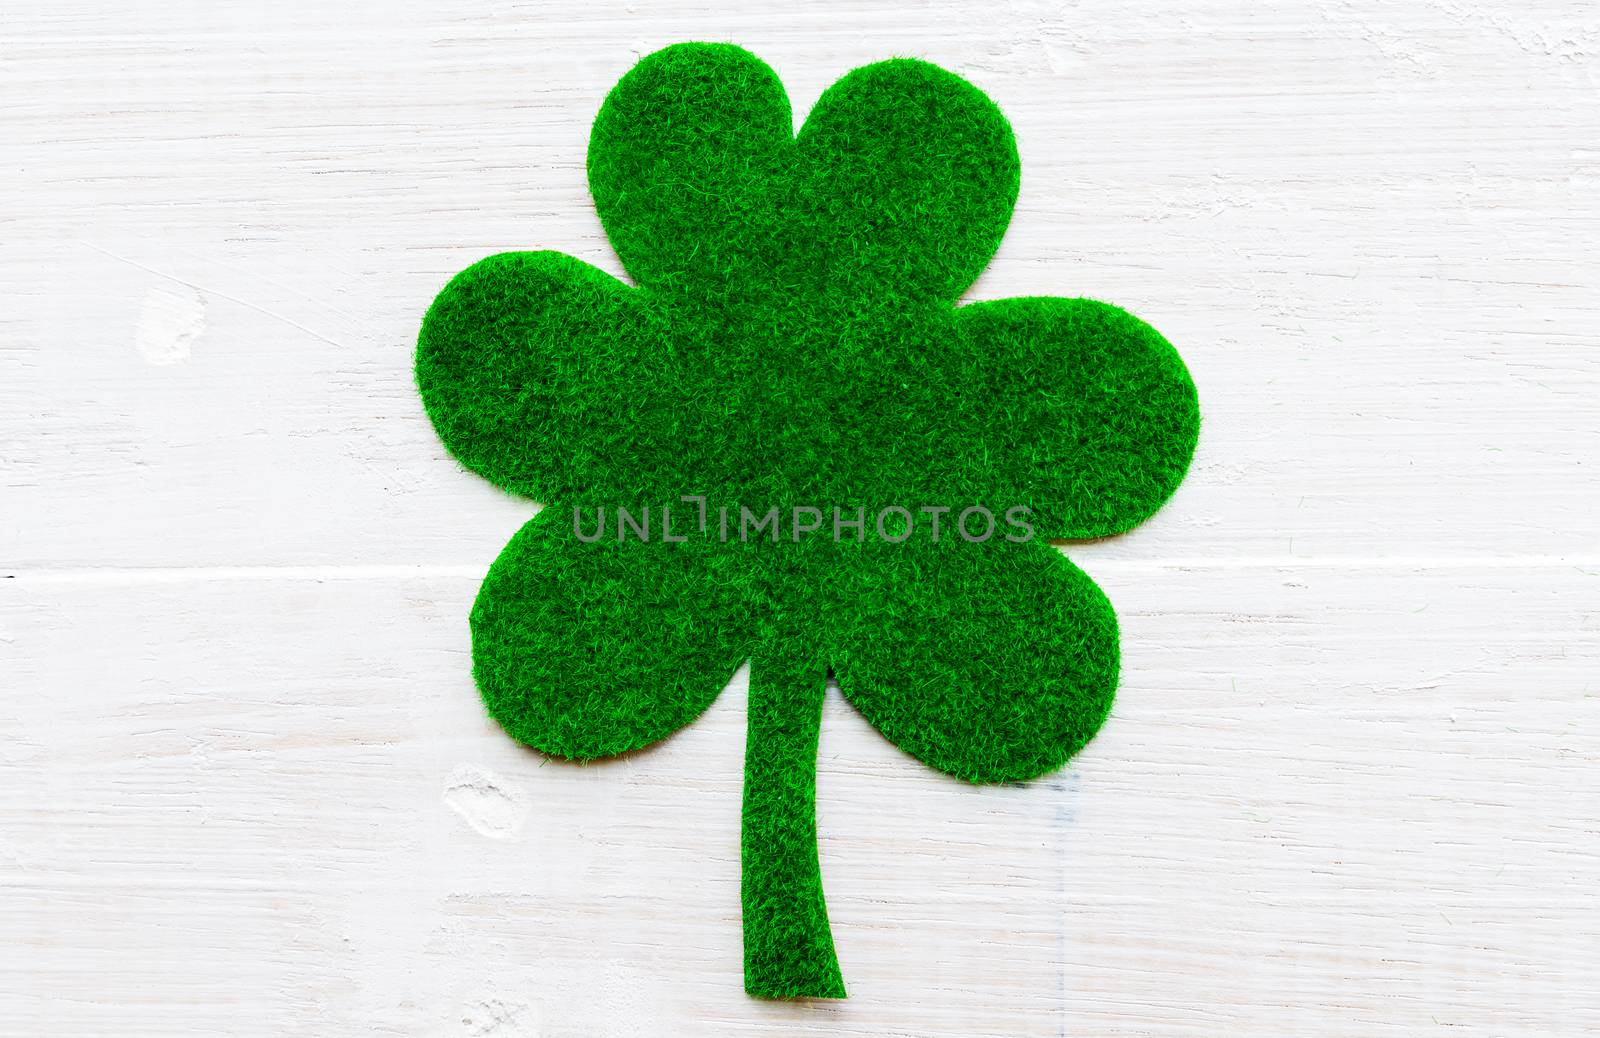 Happy St Patricks Day message on green paper clover and white wo by spukkato